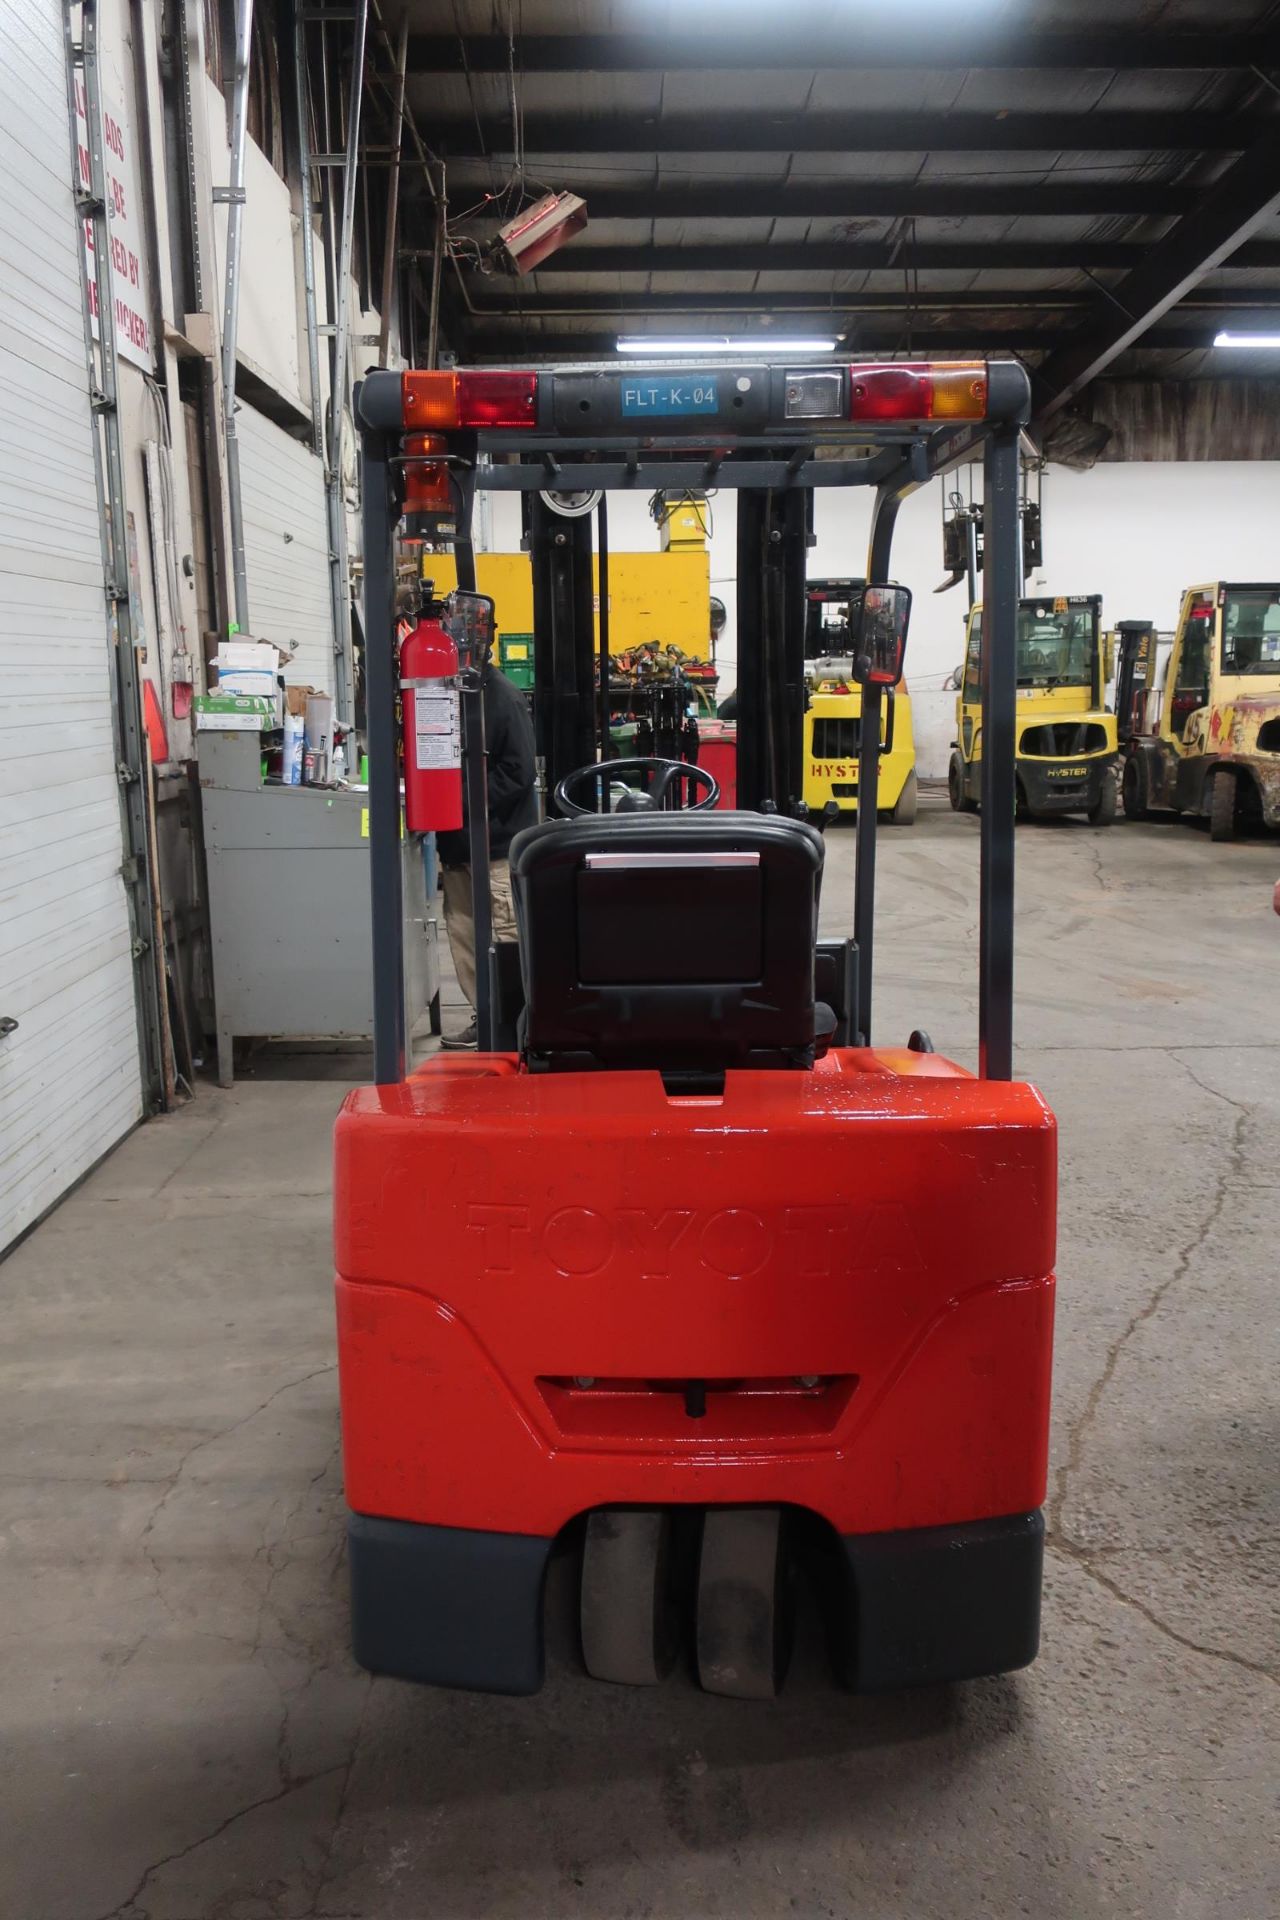 FREE CUSTOMS - Toyota 4000lbs Capacity 3-wheel Forklift Electric with 3-stage mast with sideshift - Image 3 of 3